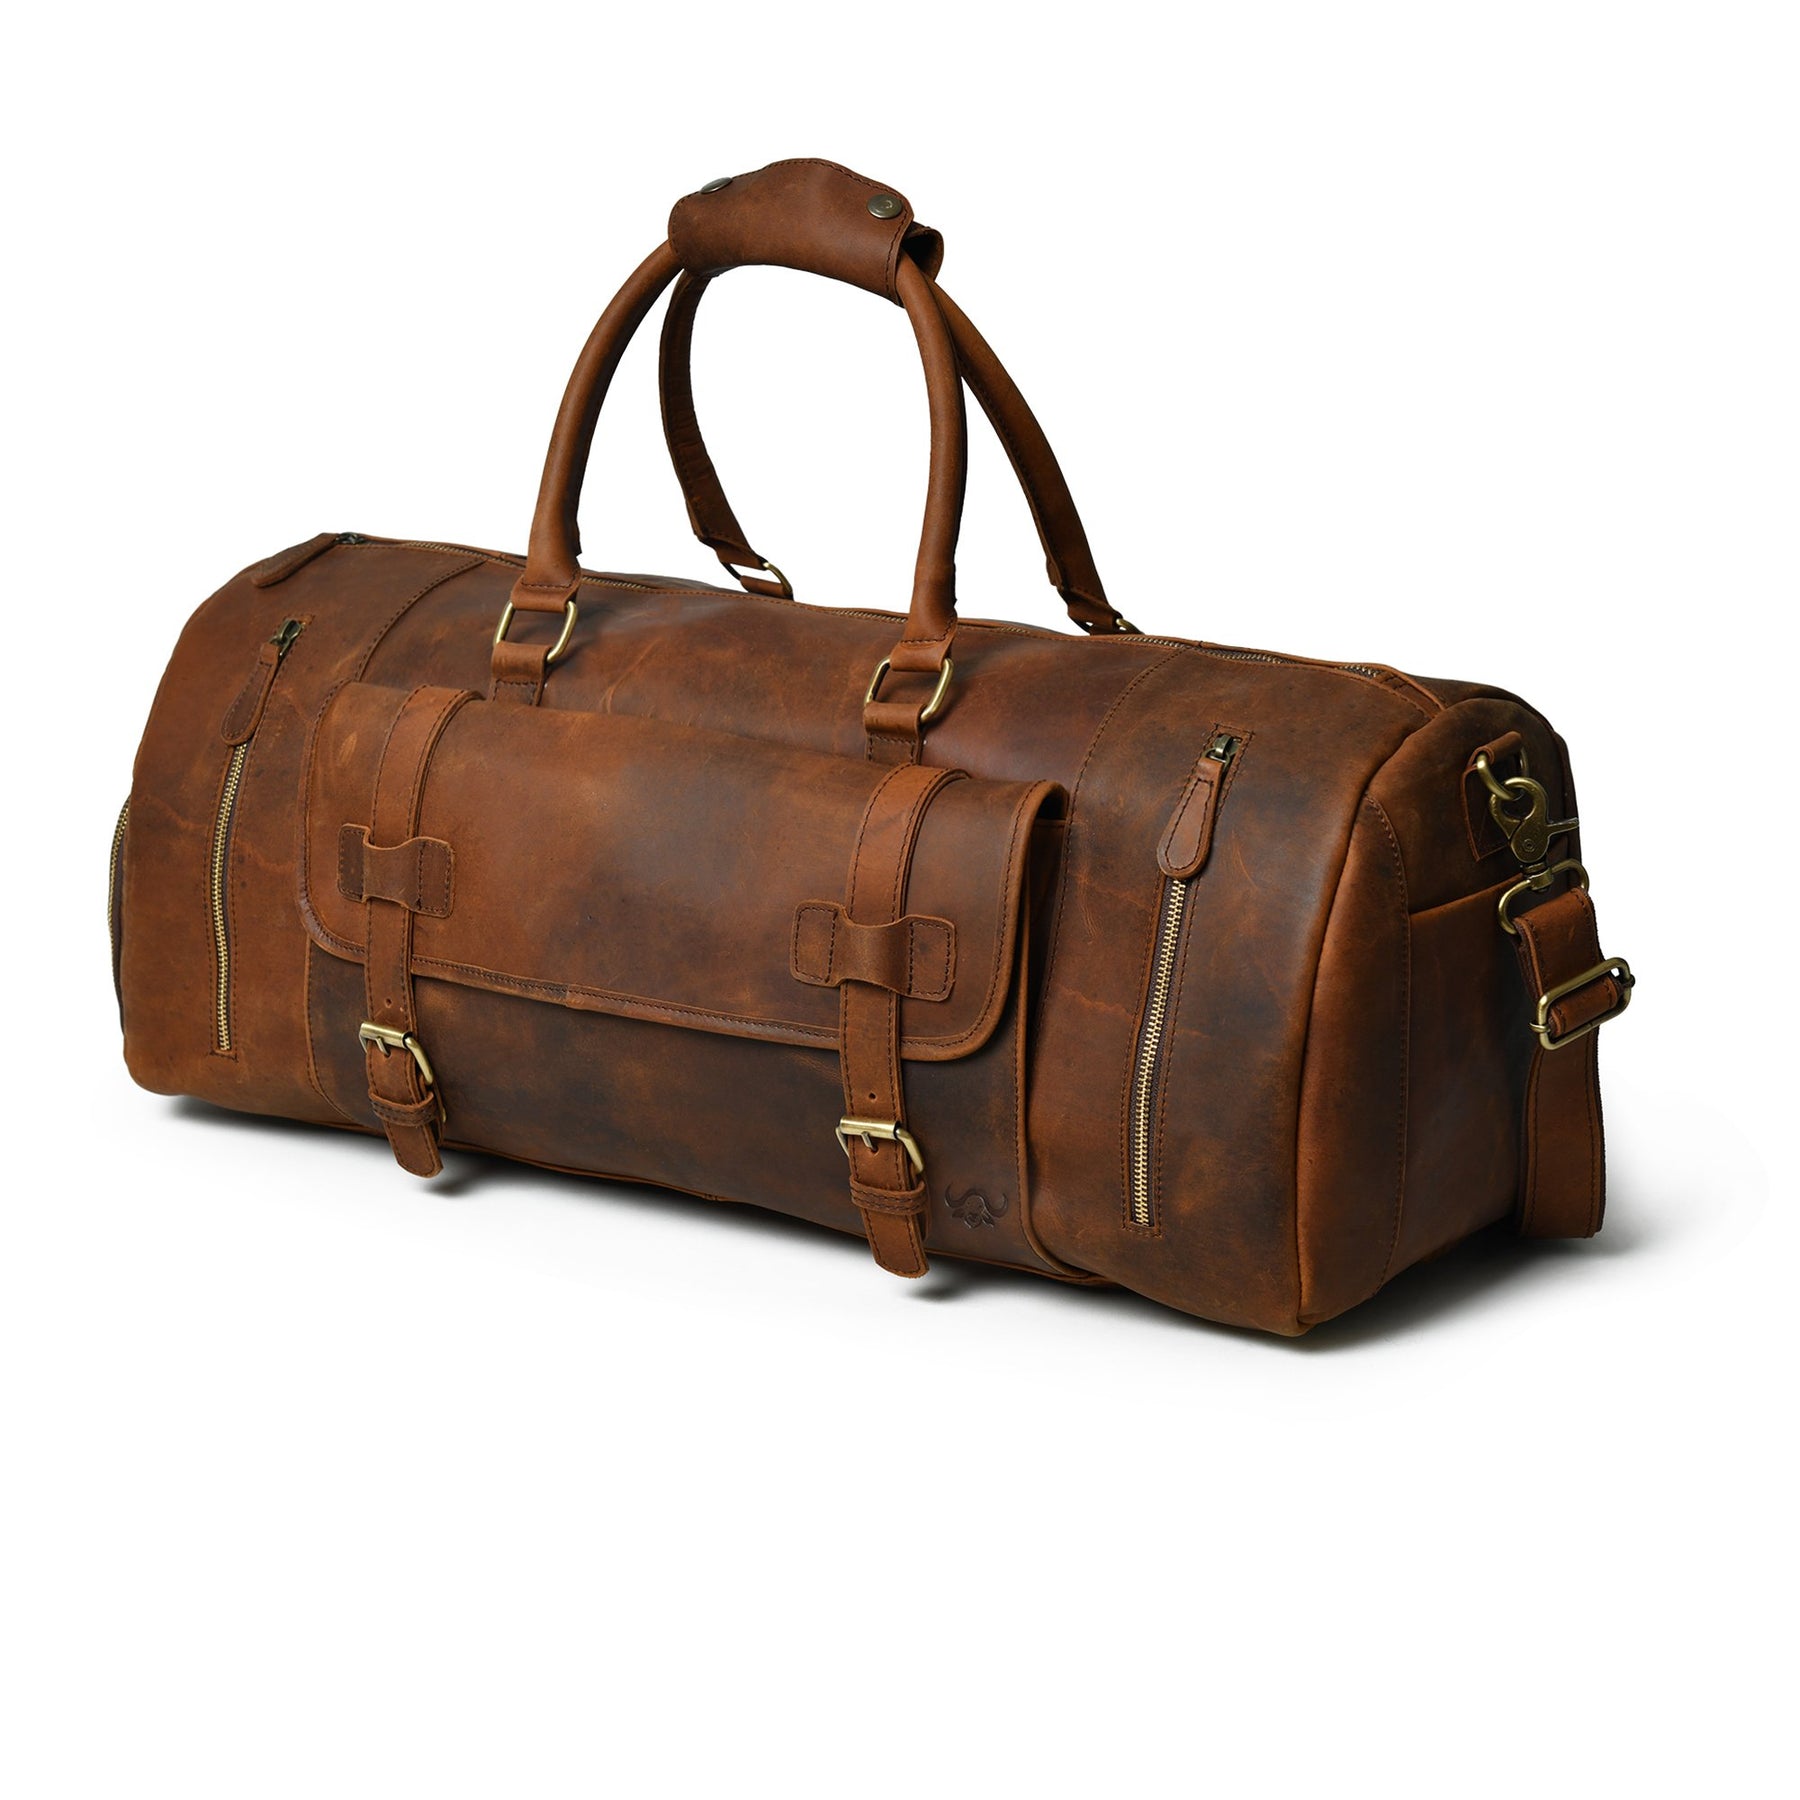 Buy Buffalo Leather Duffel Bag Online in USA at Lowest Prices | Sam's ...